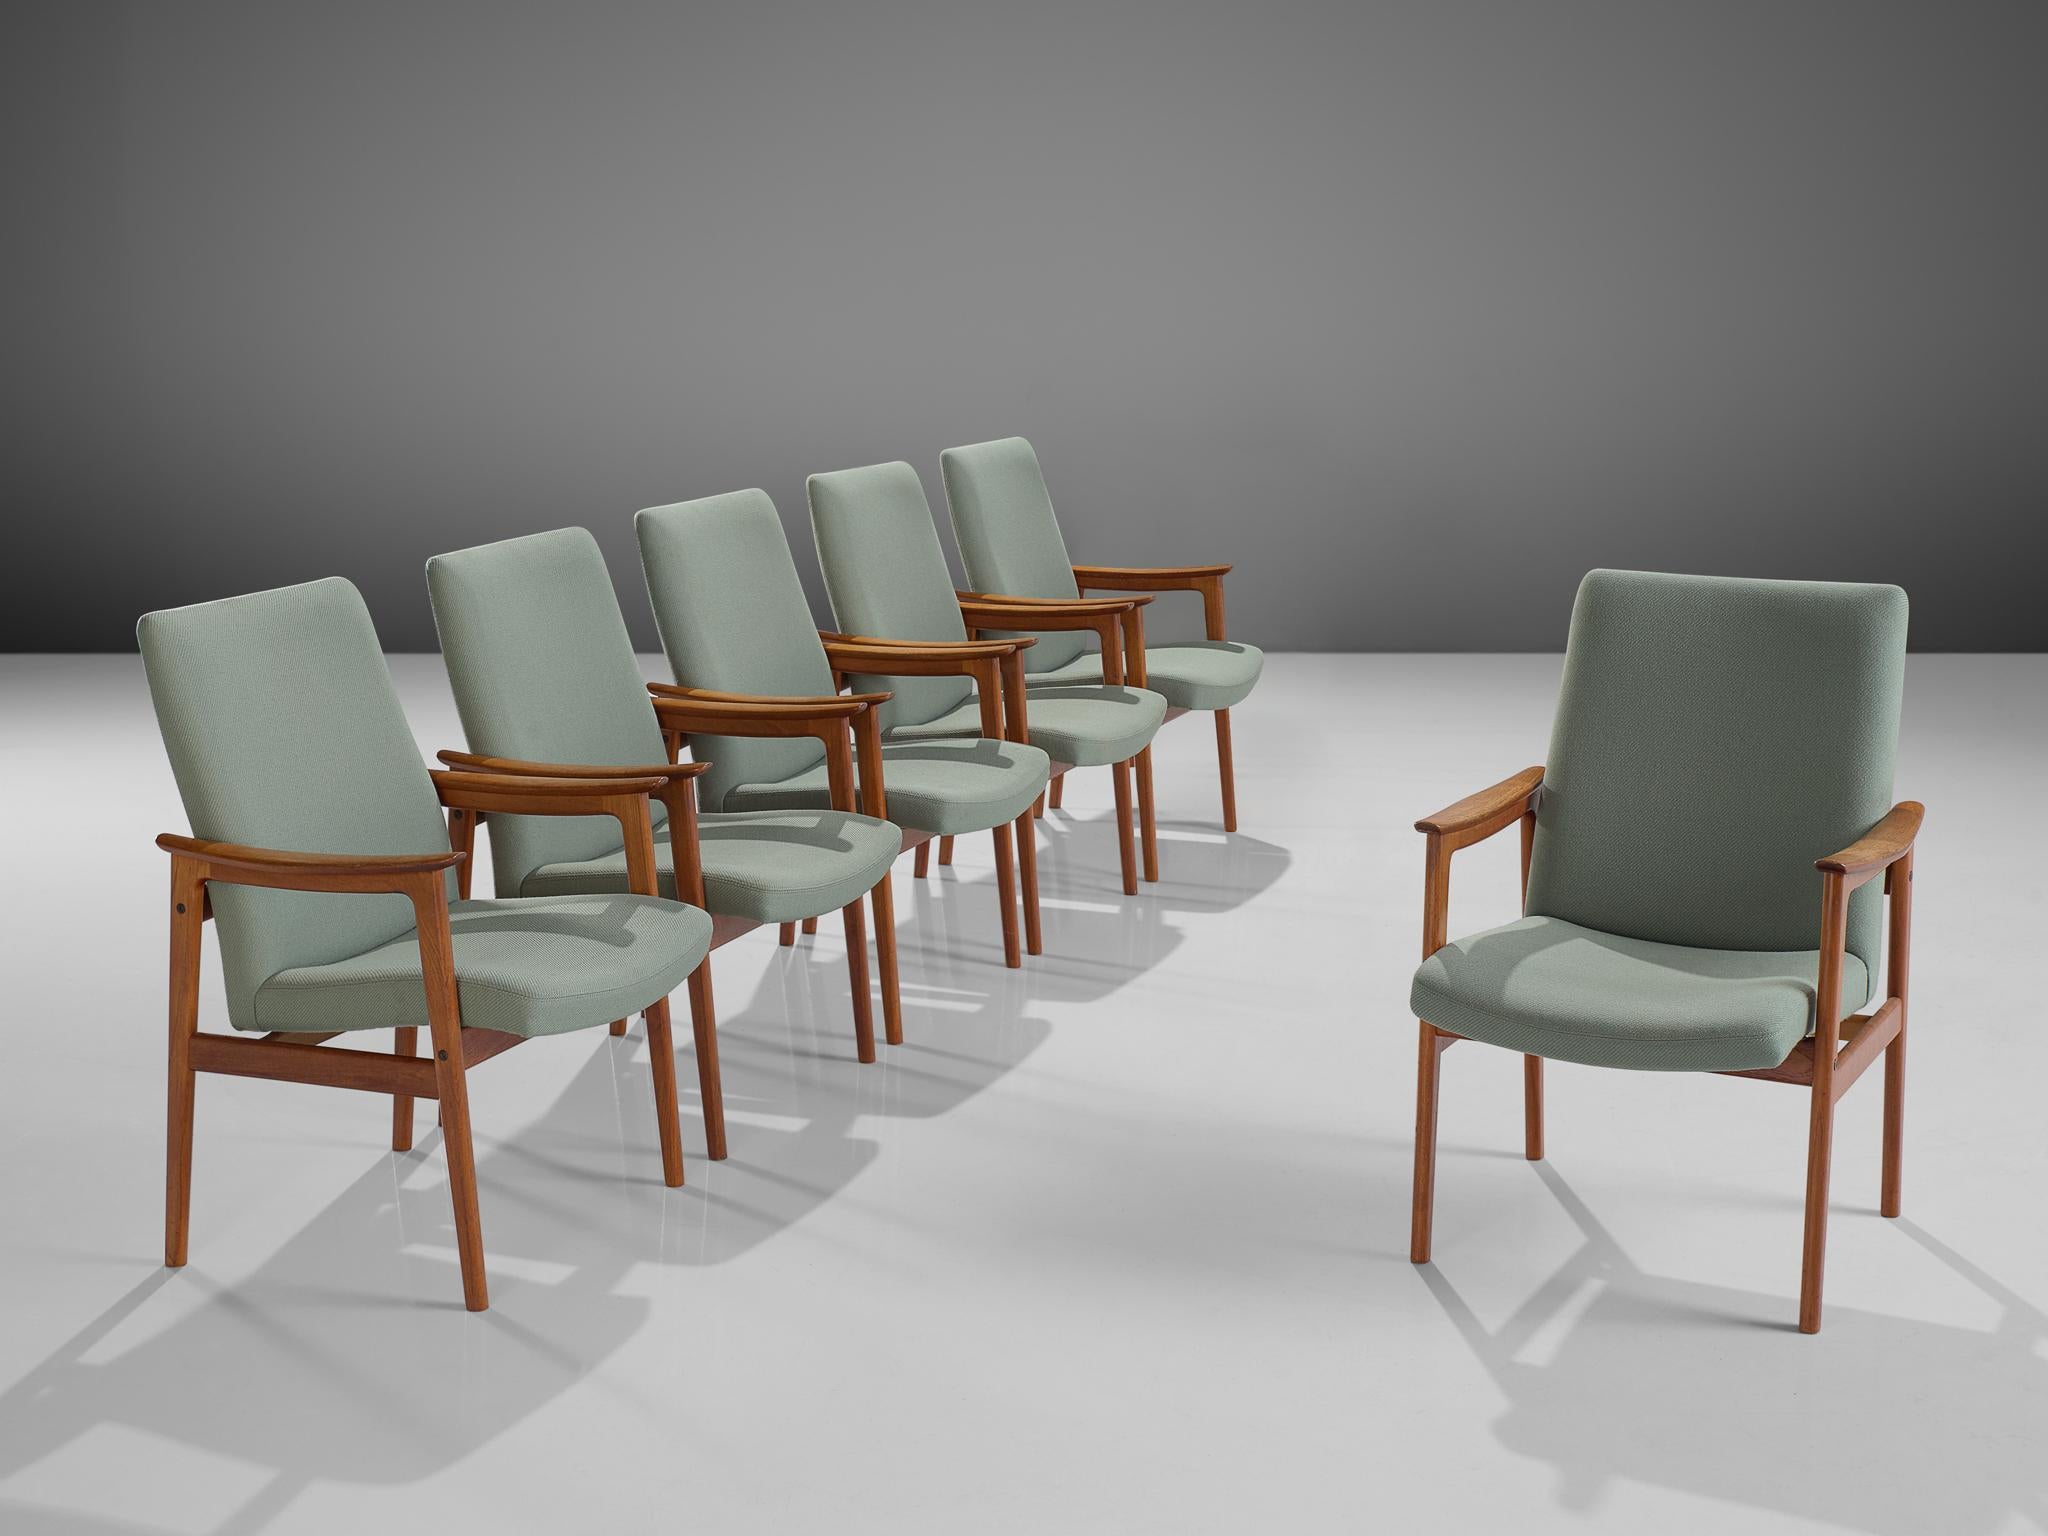 Set of six armchairs, teak and mint green fabric, Scandinavia, 1950s. 

These Scandinavian teak dining chairs with armrests are both stately and modest. This set has an elegant teak frame with a beautiful visible grain. Nicely curved armrests and